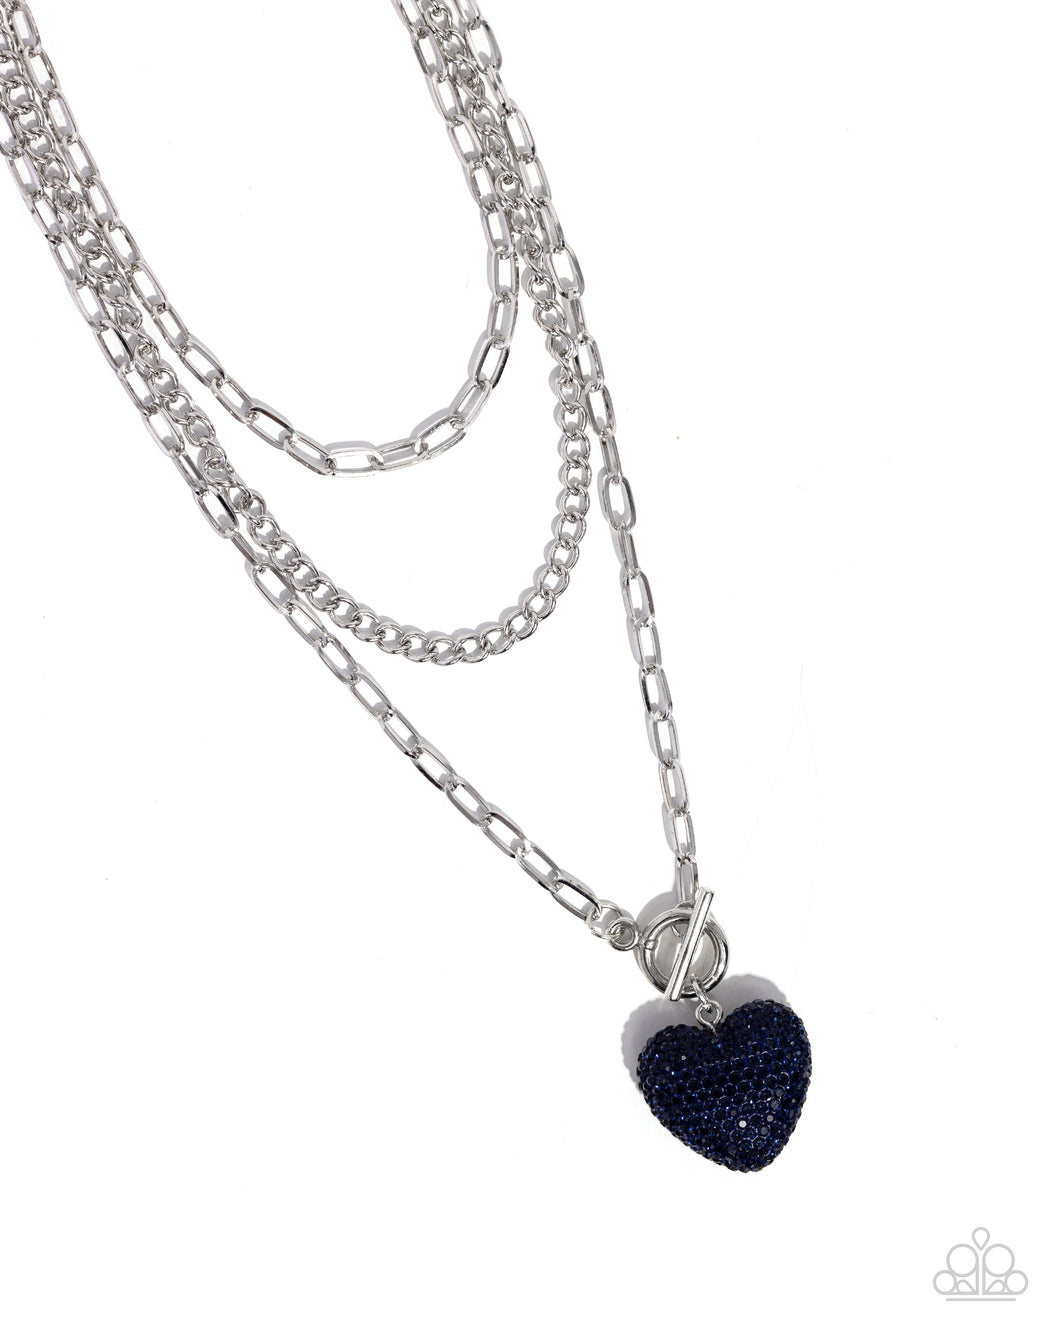 HEART Gallery - Blue Necklace